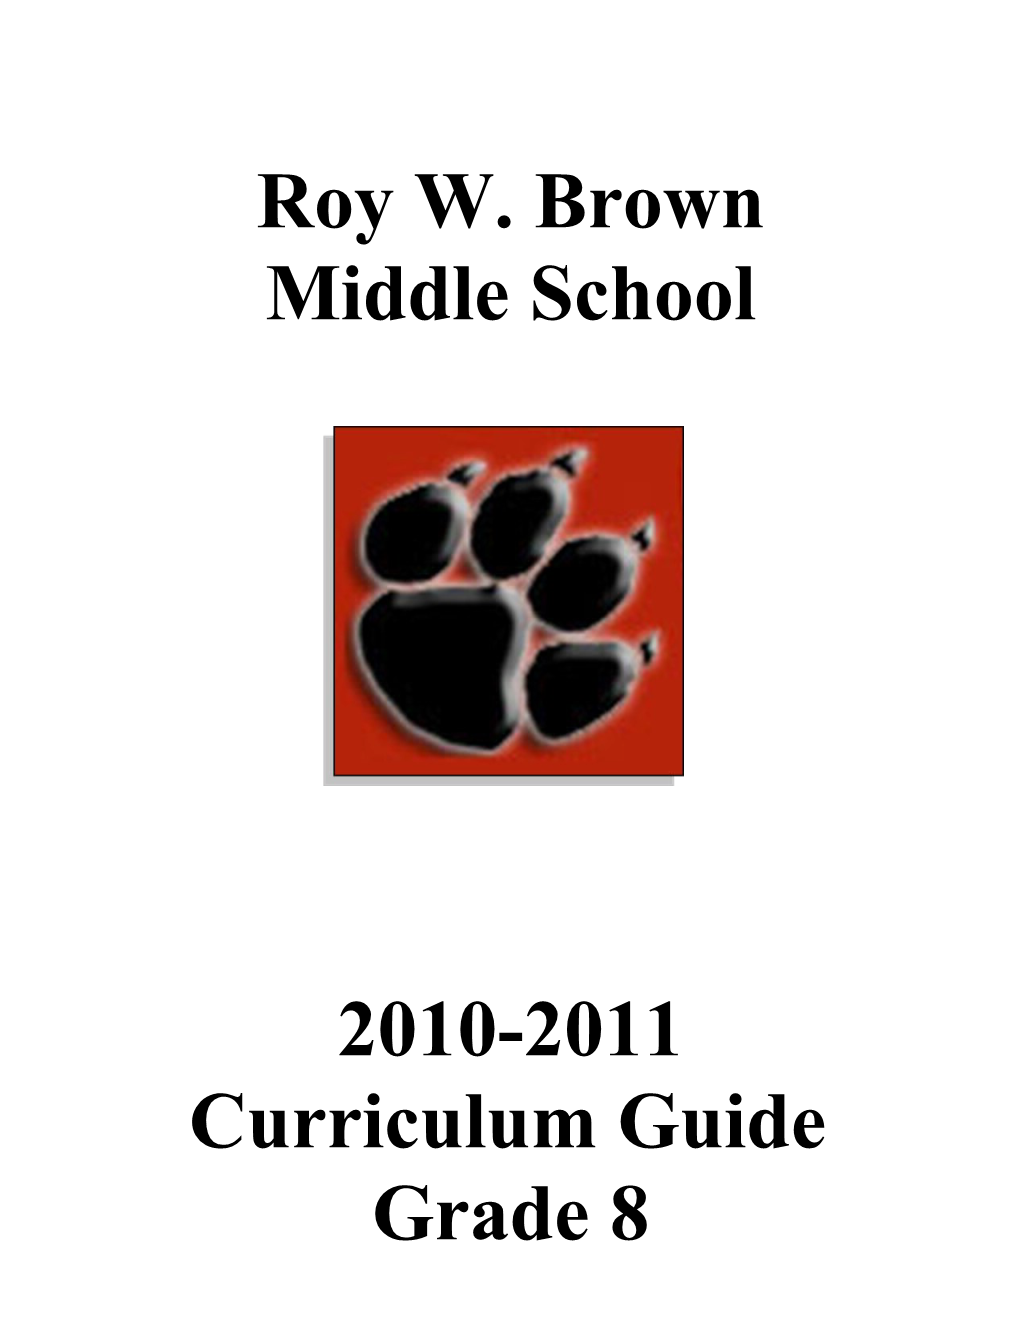 Roy W. Brown Middle School Curriculum Guide